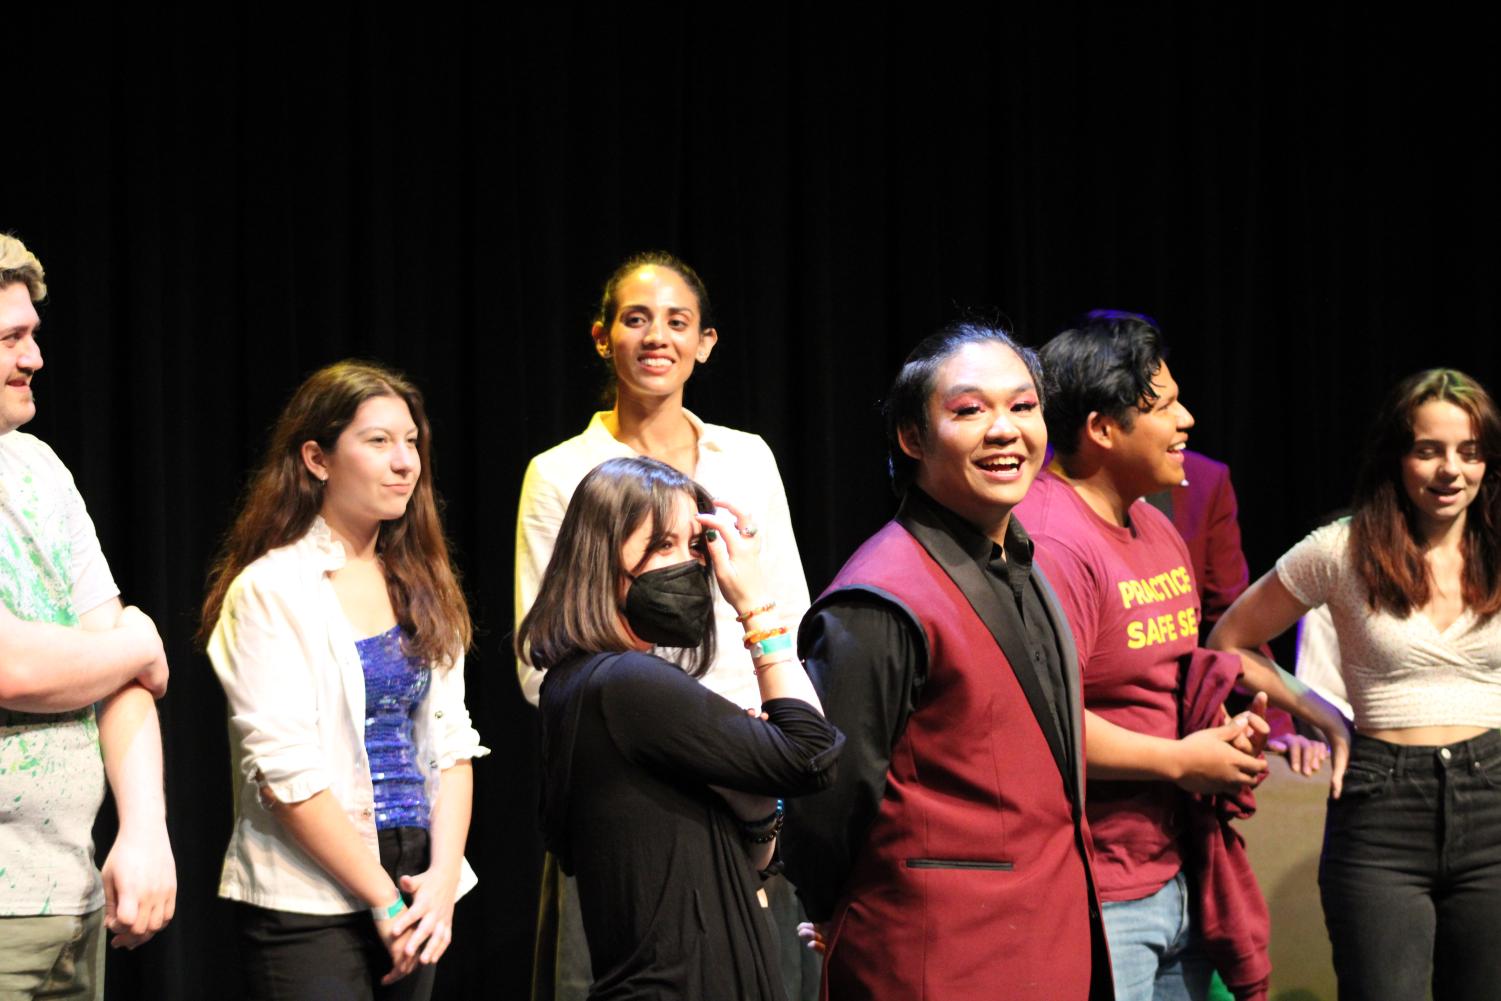 Students involved in the "Student One Acts" gathered together on stage after the performance on April 28, 2022. The "Student One Acts" took place in the Black Box Theatre of the Moorpark College Performing Arts Center.